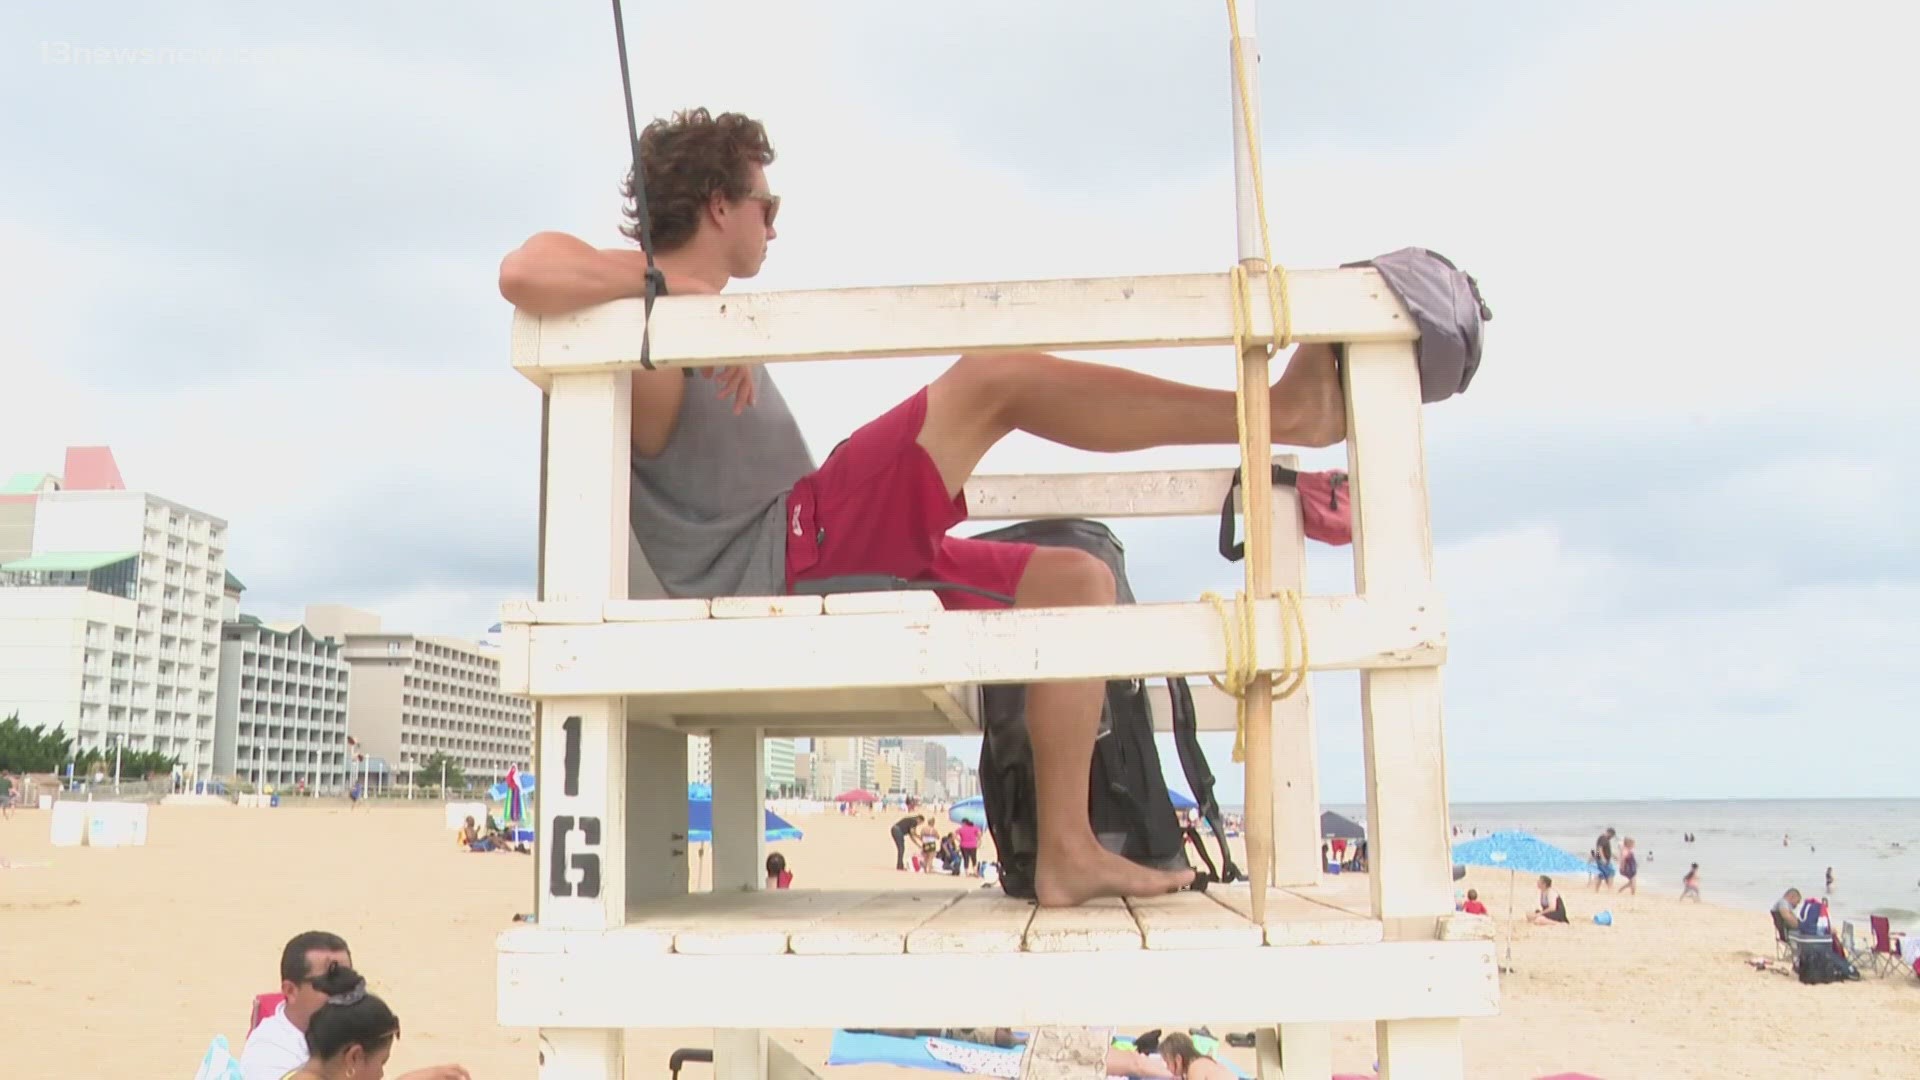 Lifeguards will be on stands at the beach May 13th through September 17th and officials are still hiring.